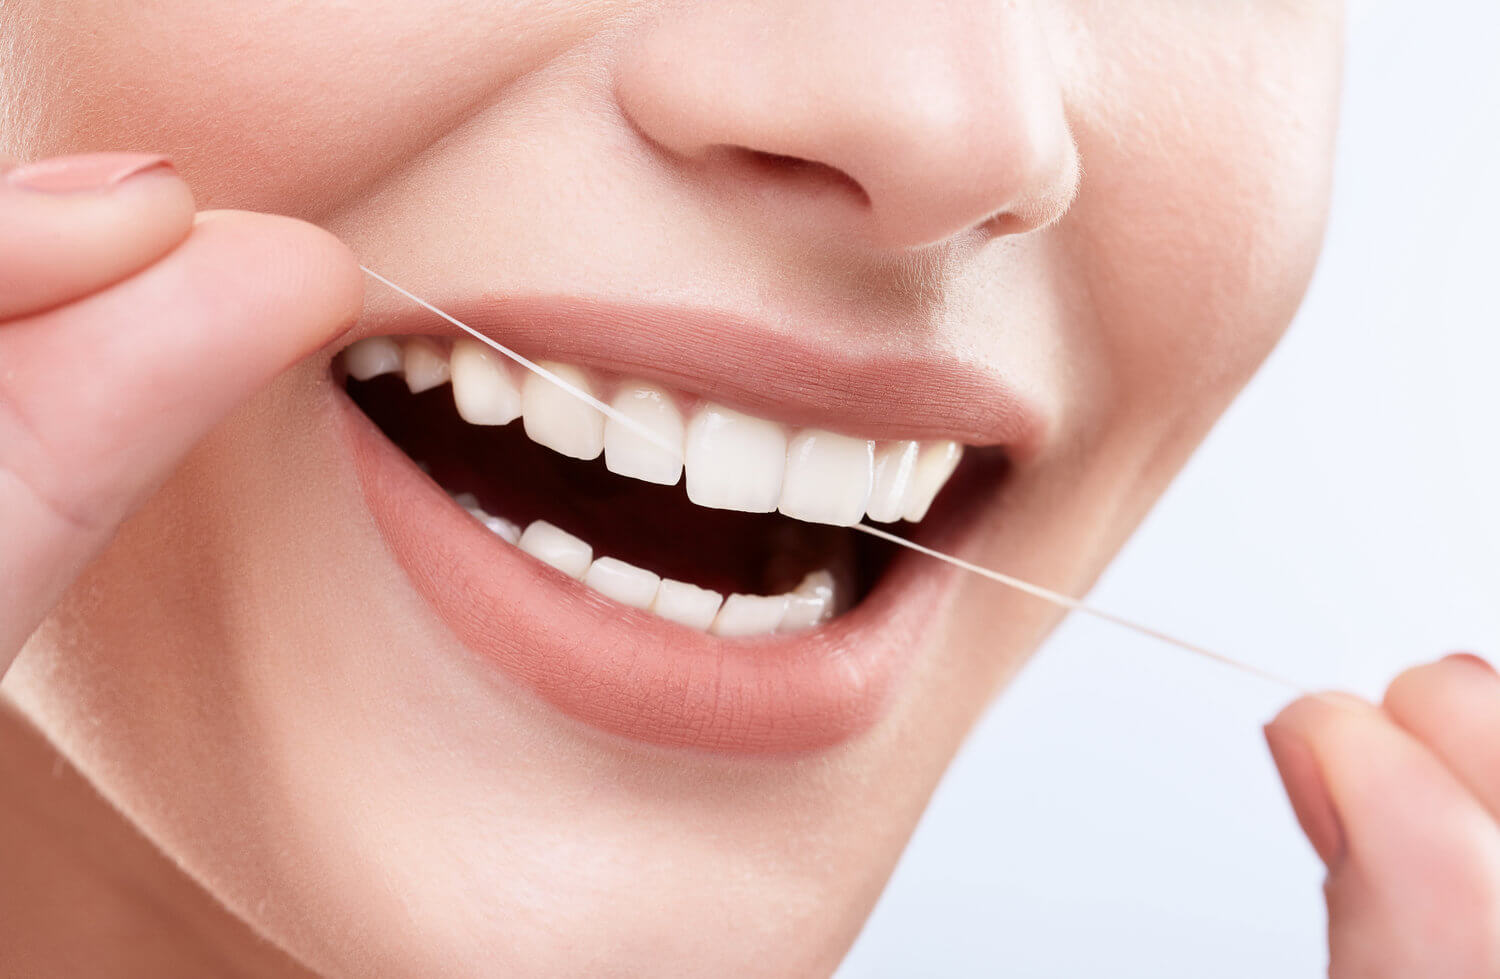 Morgan Street Dental Centre Preventive Care and Dental Hygiene - Woman with White Teeth Flossing